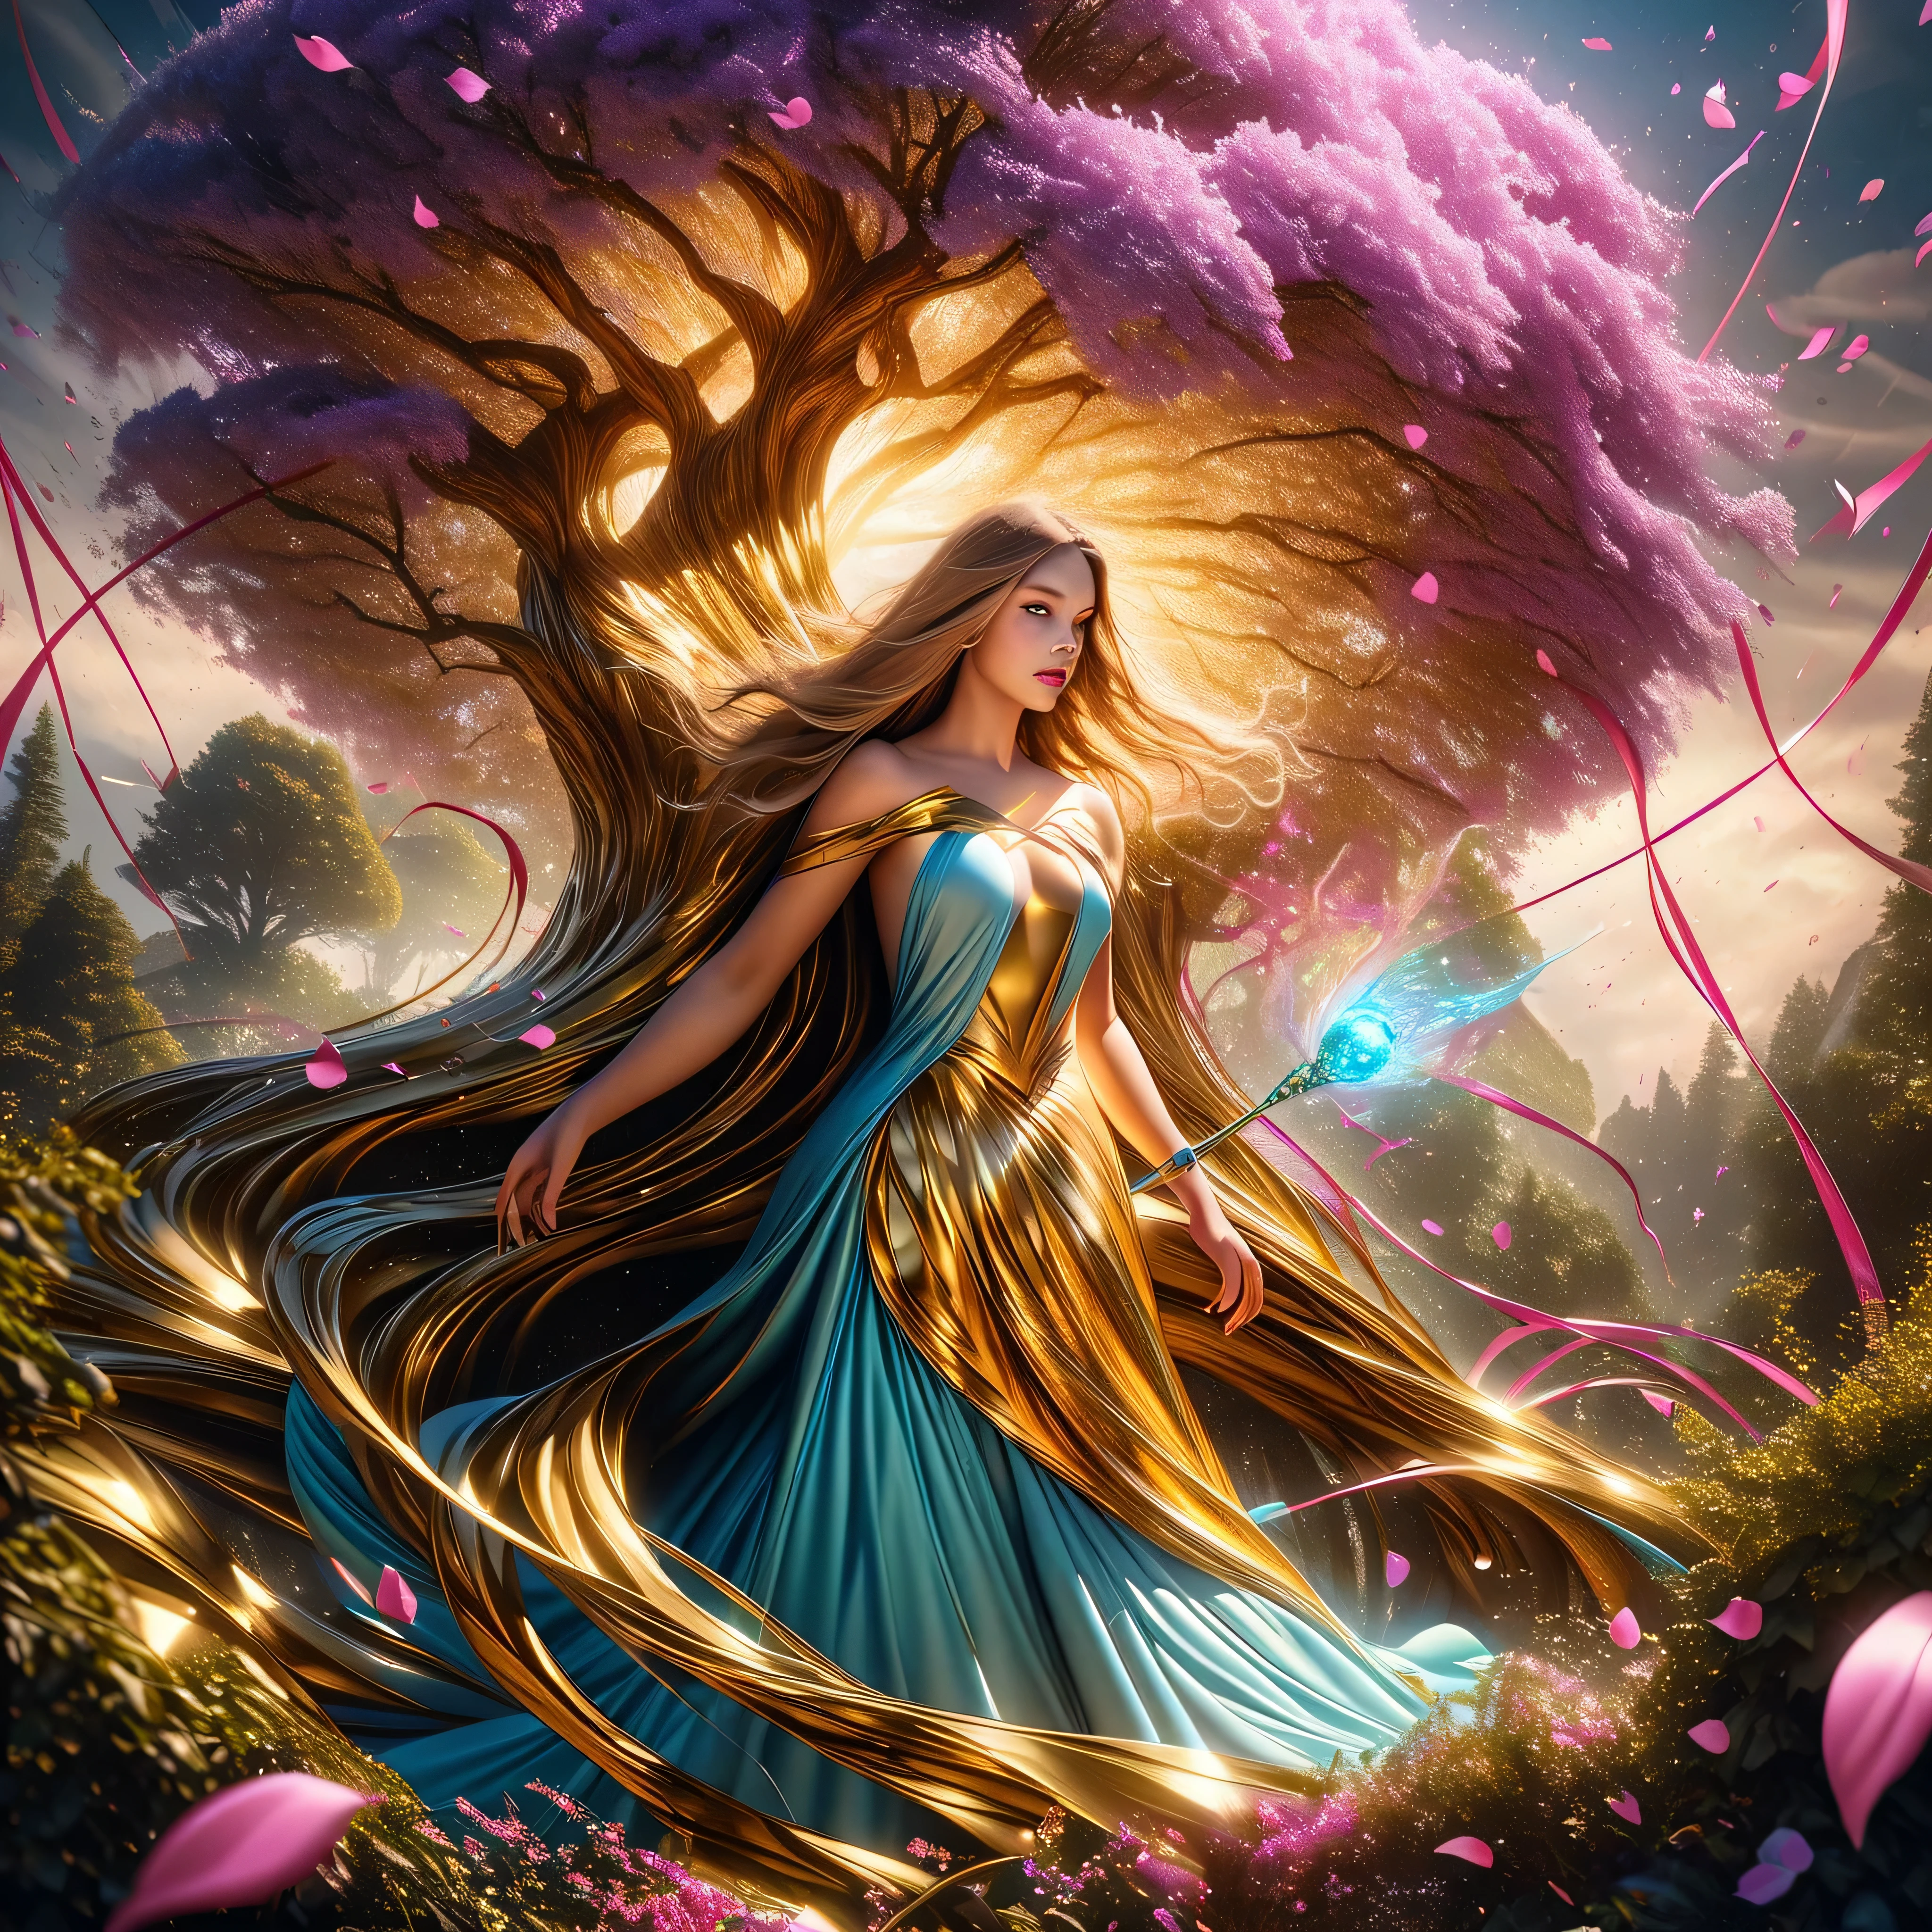 photograph, photorealistic, ultra-realistic, intricately detailed, wide angle, fine fractal glossy vivid colored shiny contours outlines of a glass apple with a ("a glowing golden flying female fairy uses her wand to transform a tree to solid gold.") inside, surreal, gradient, windy, petals floating on the wind, swirling ribbons of ink and light. linquivera, liiv1. --v6 --s1000 --c20 --q5 --chaos100